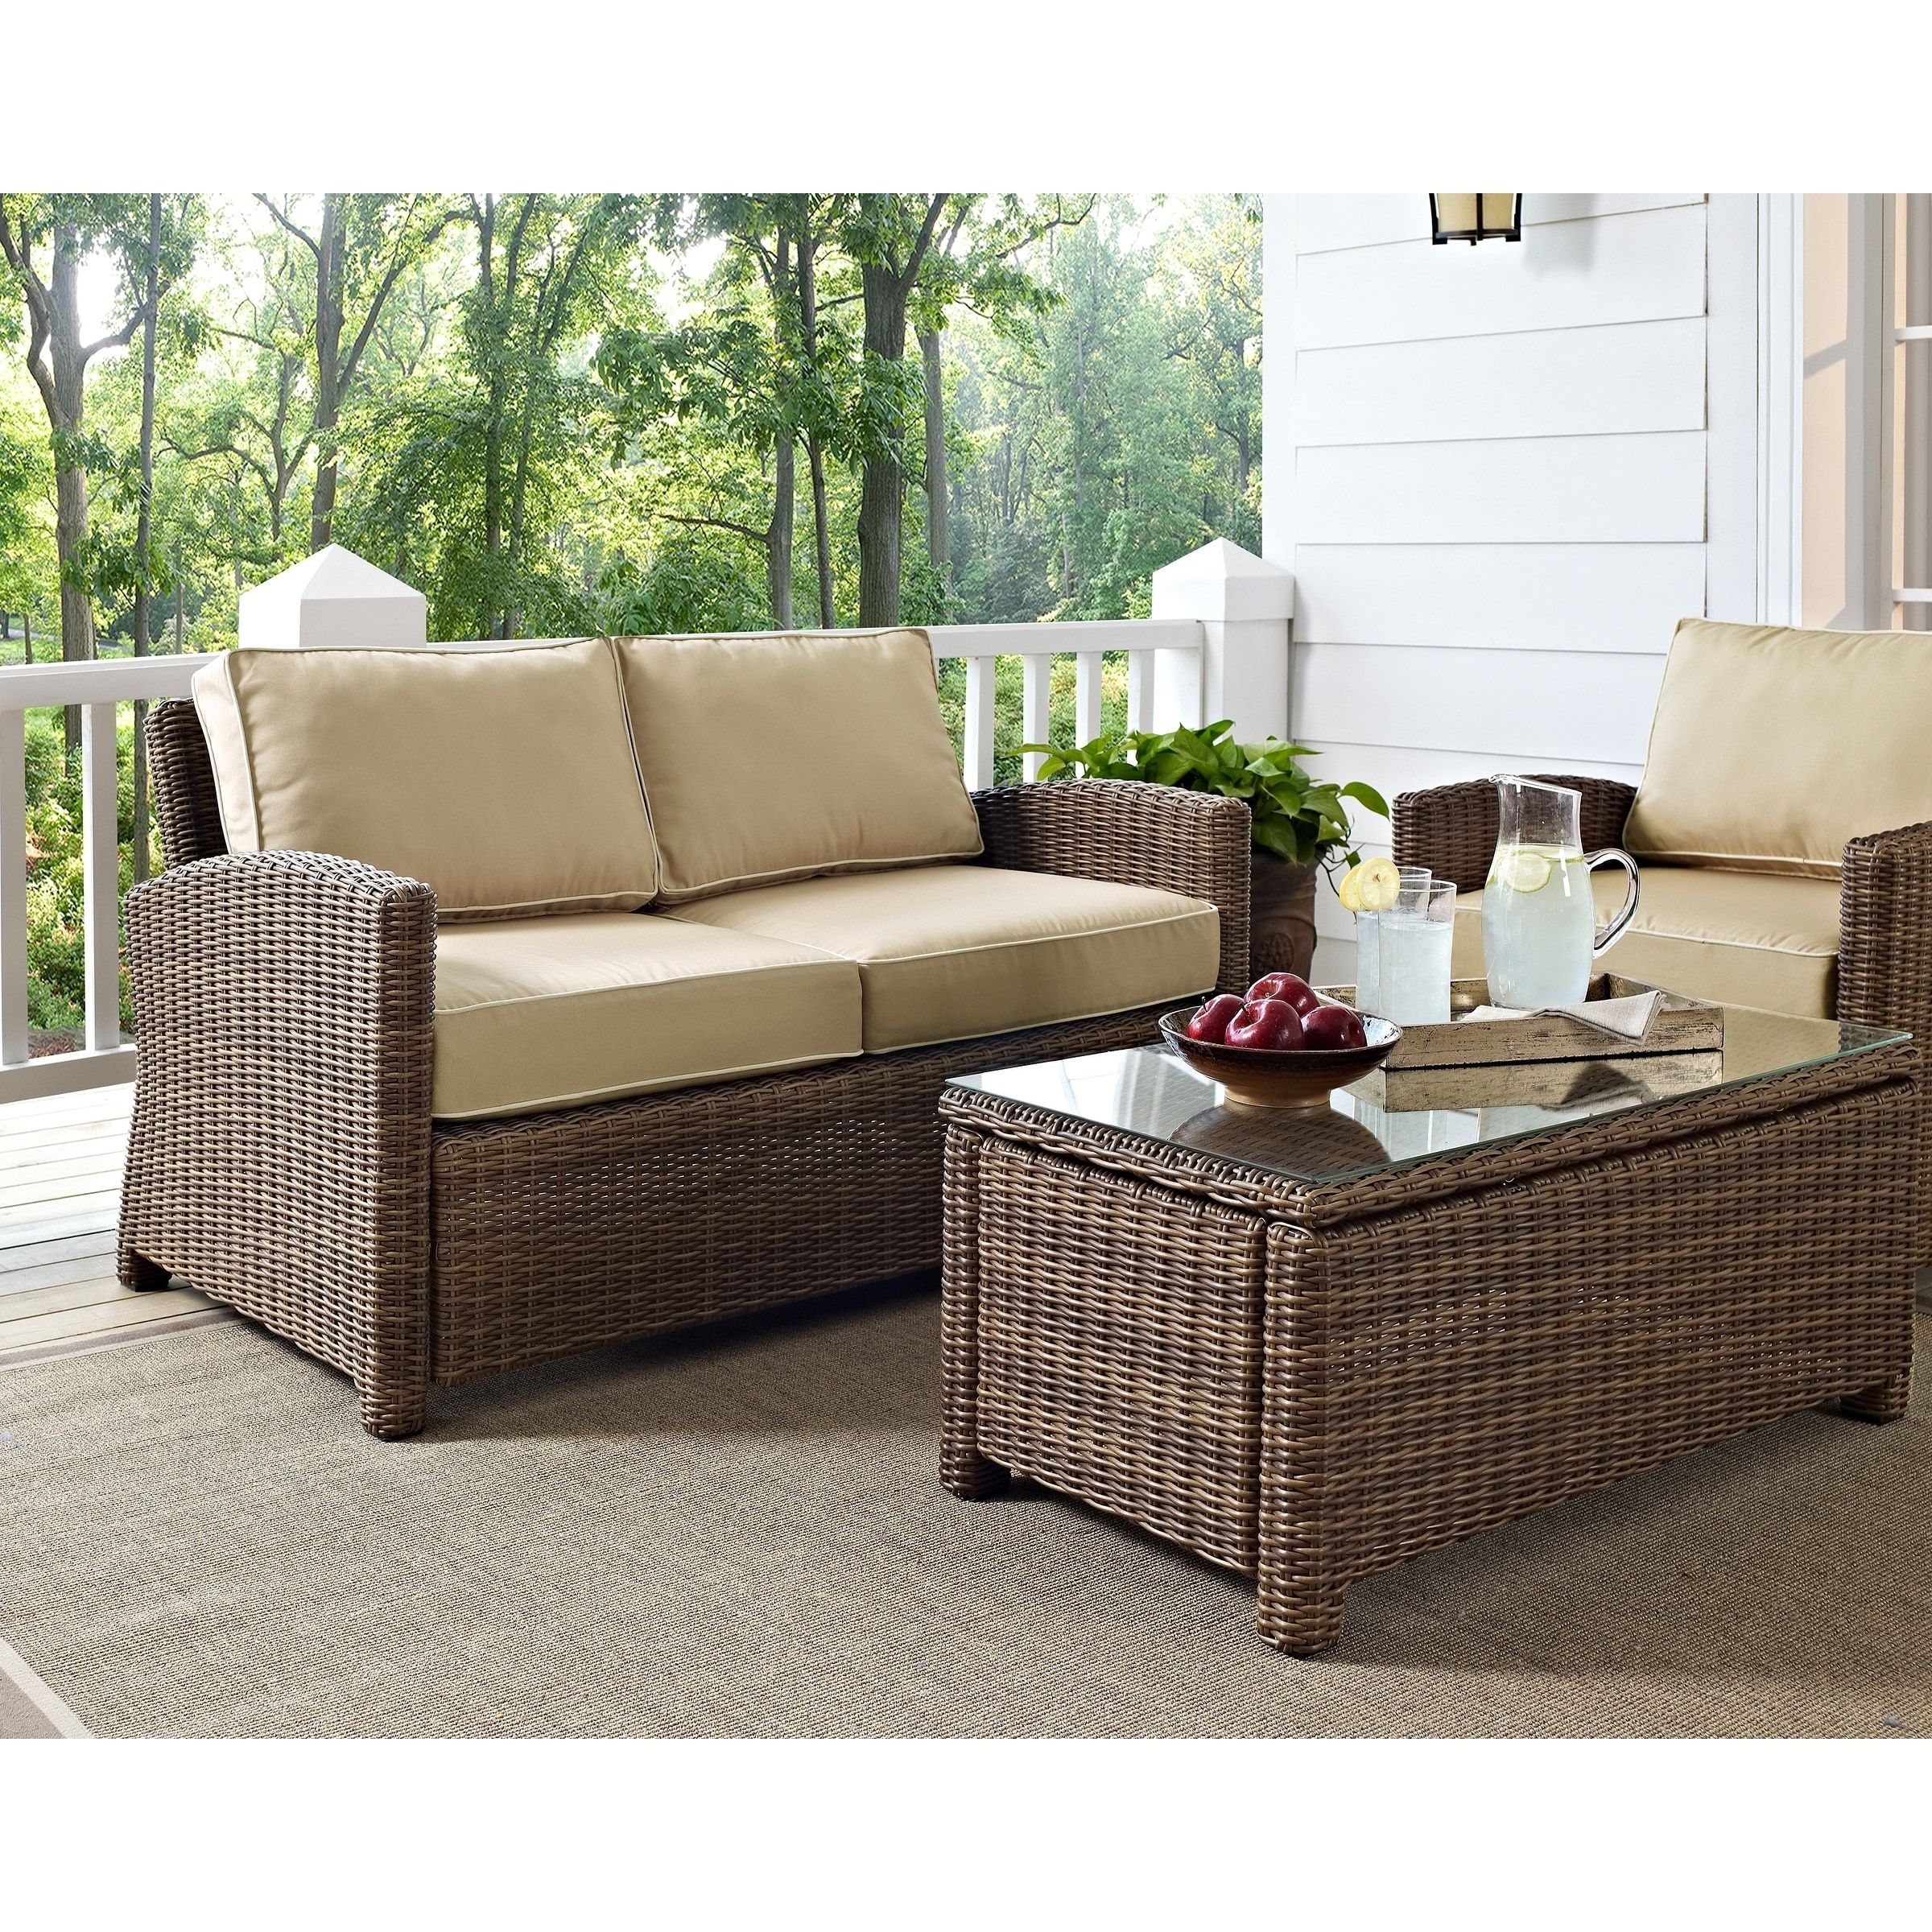 Bradenton Outdoor Wicker Loveseat With Sand Cushions – On Sale – – 14790658 For 2020 Outdoor Sand Cushions Loveseats (View 2 of 15)